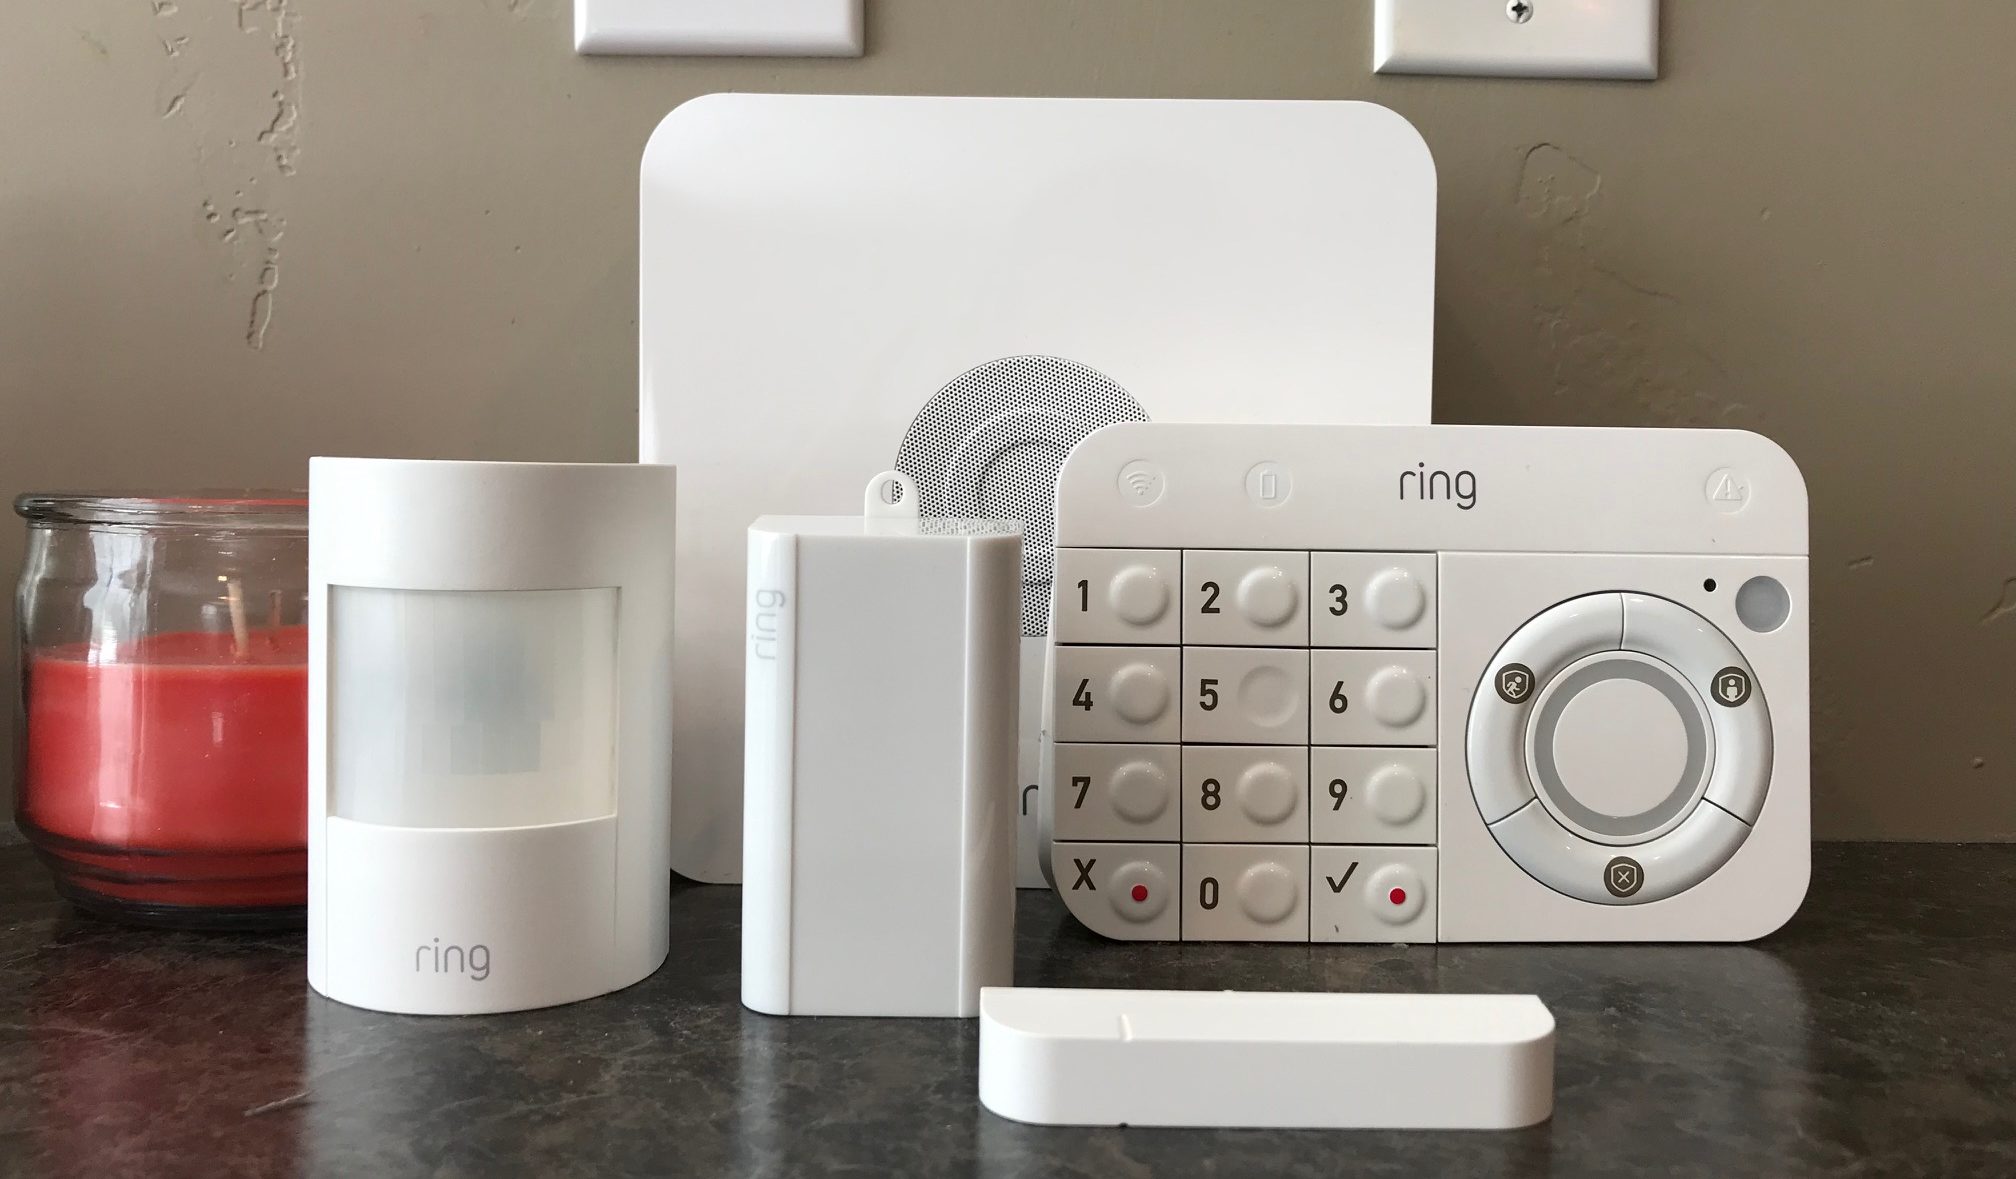 Which company is best for home security?